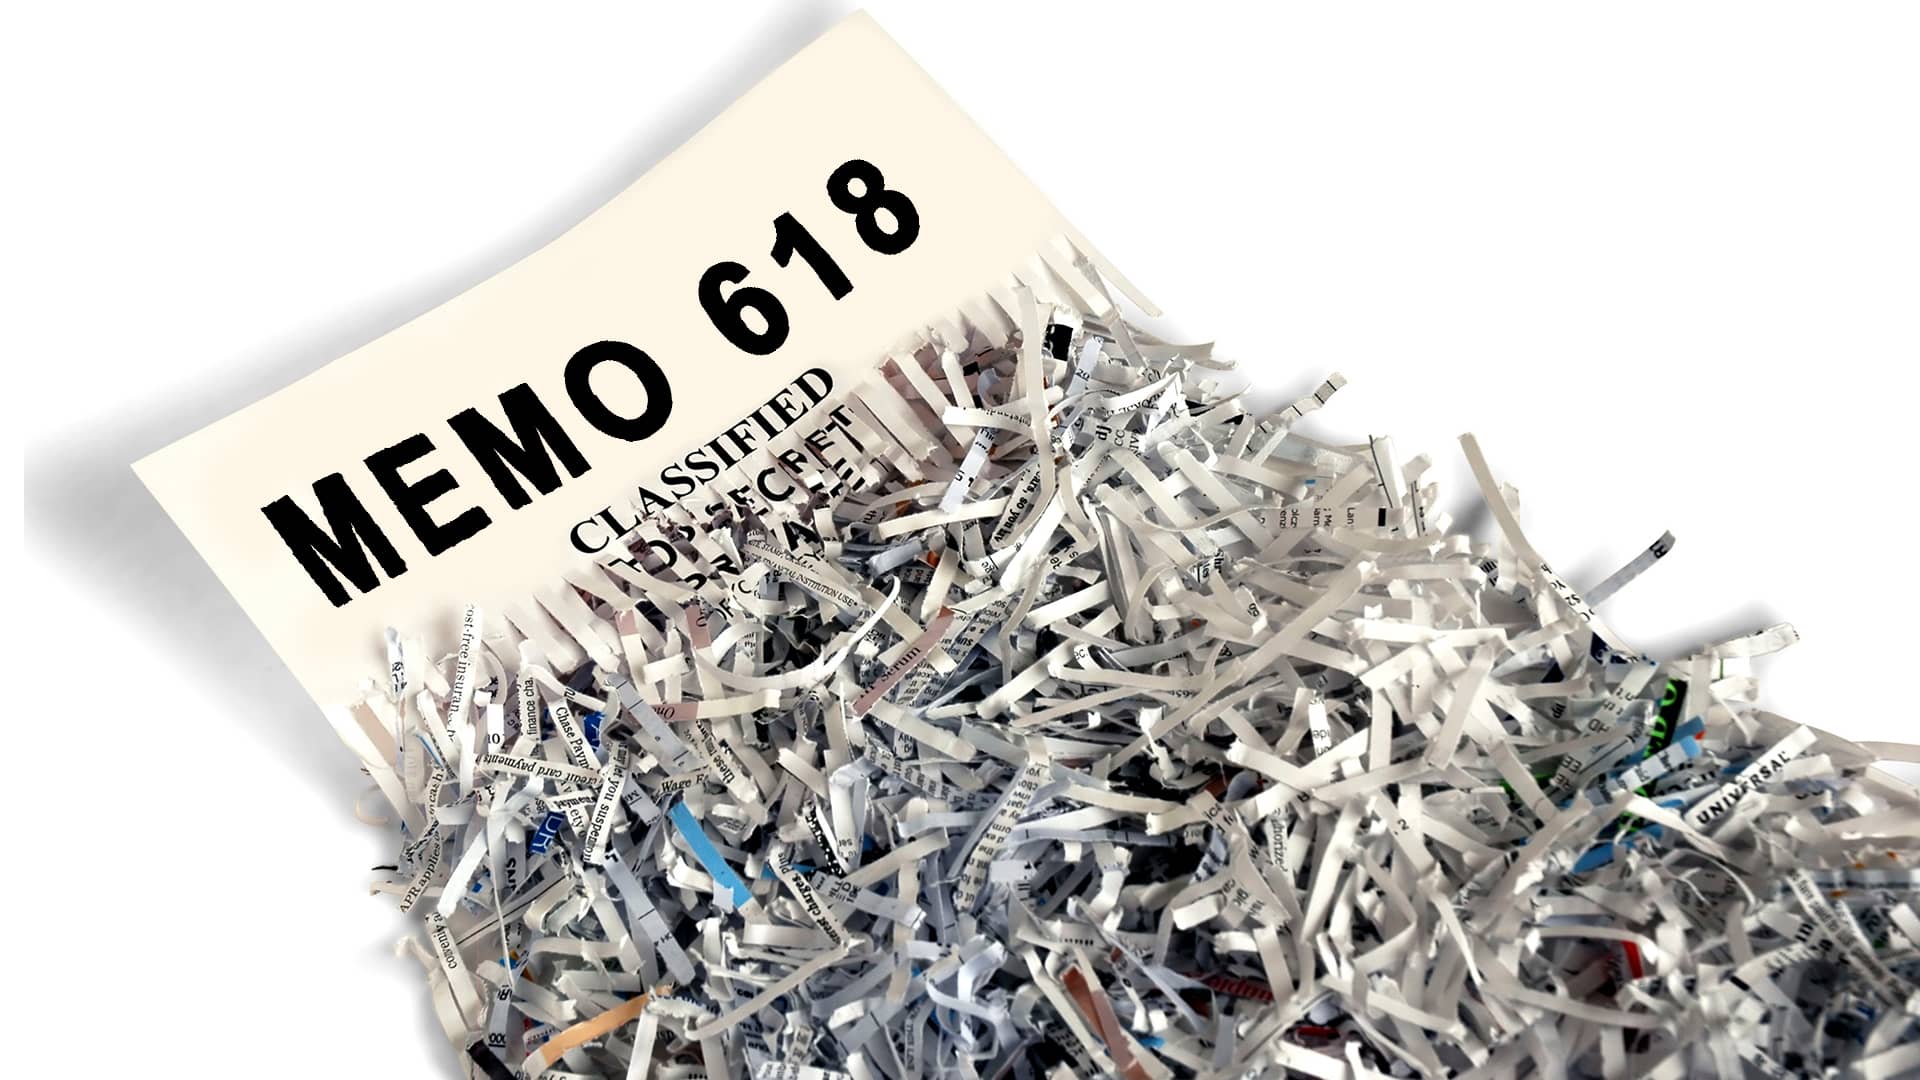 What is Memo 618? The secret of Memo 618 revealed